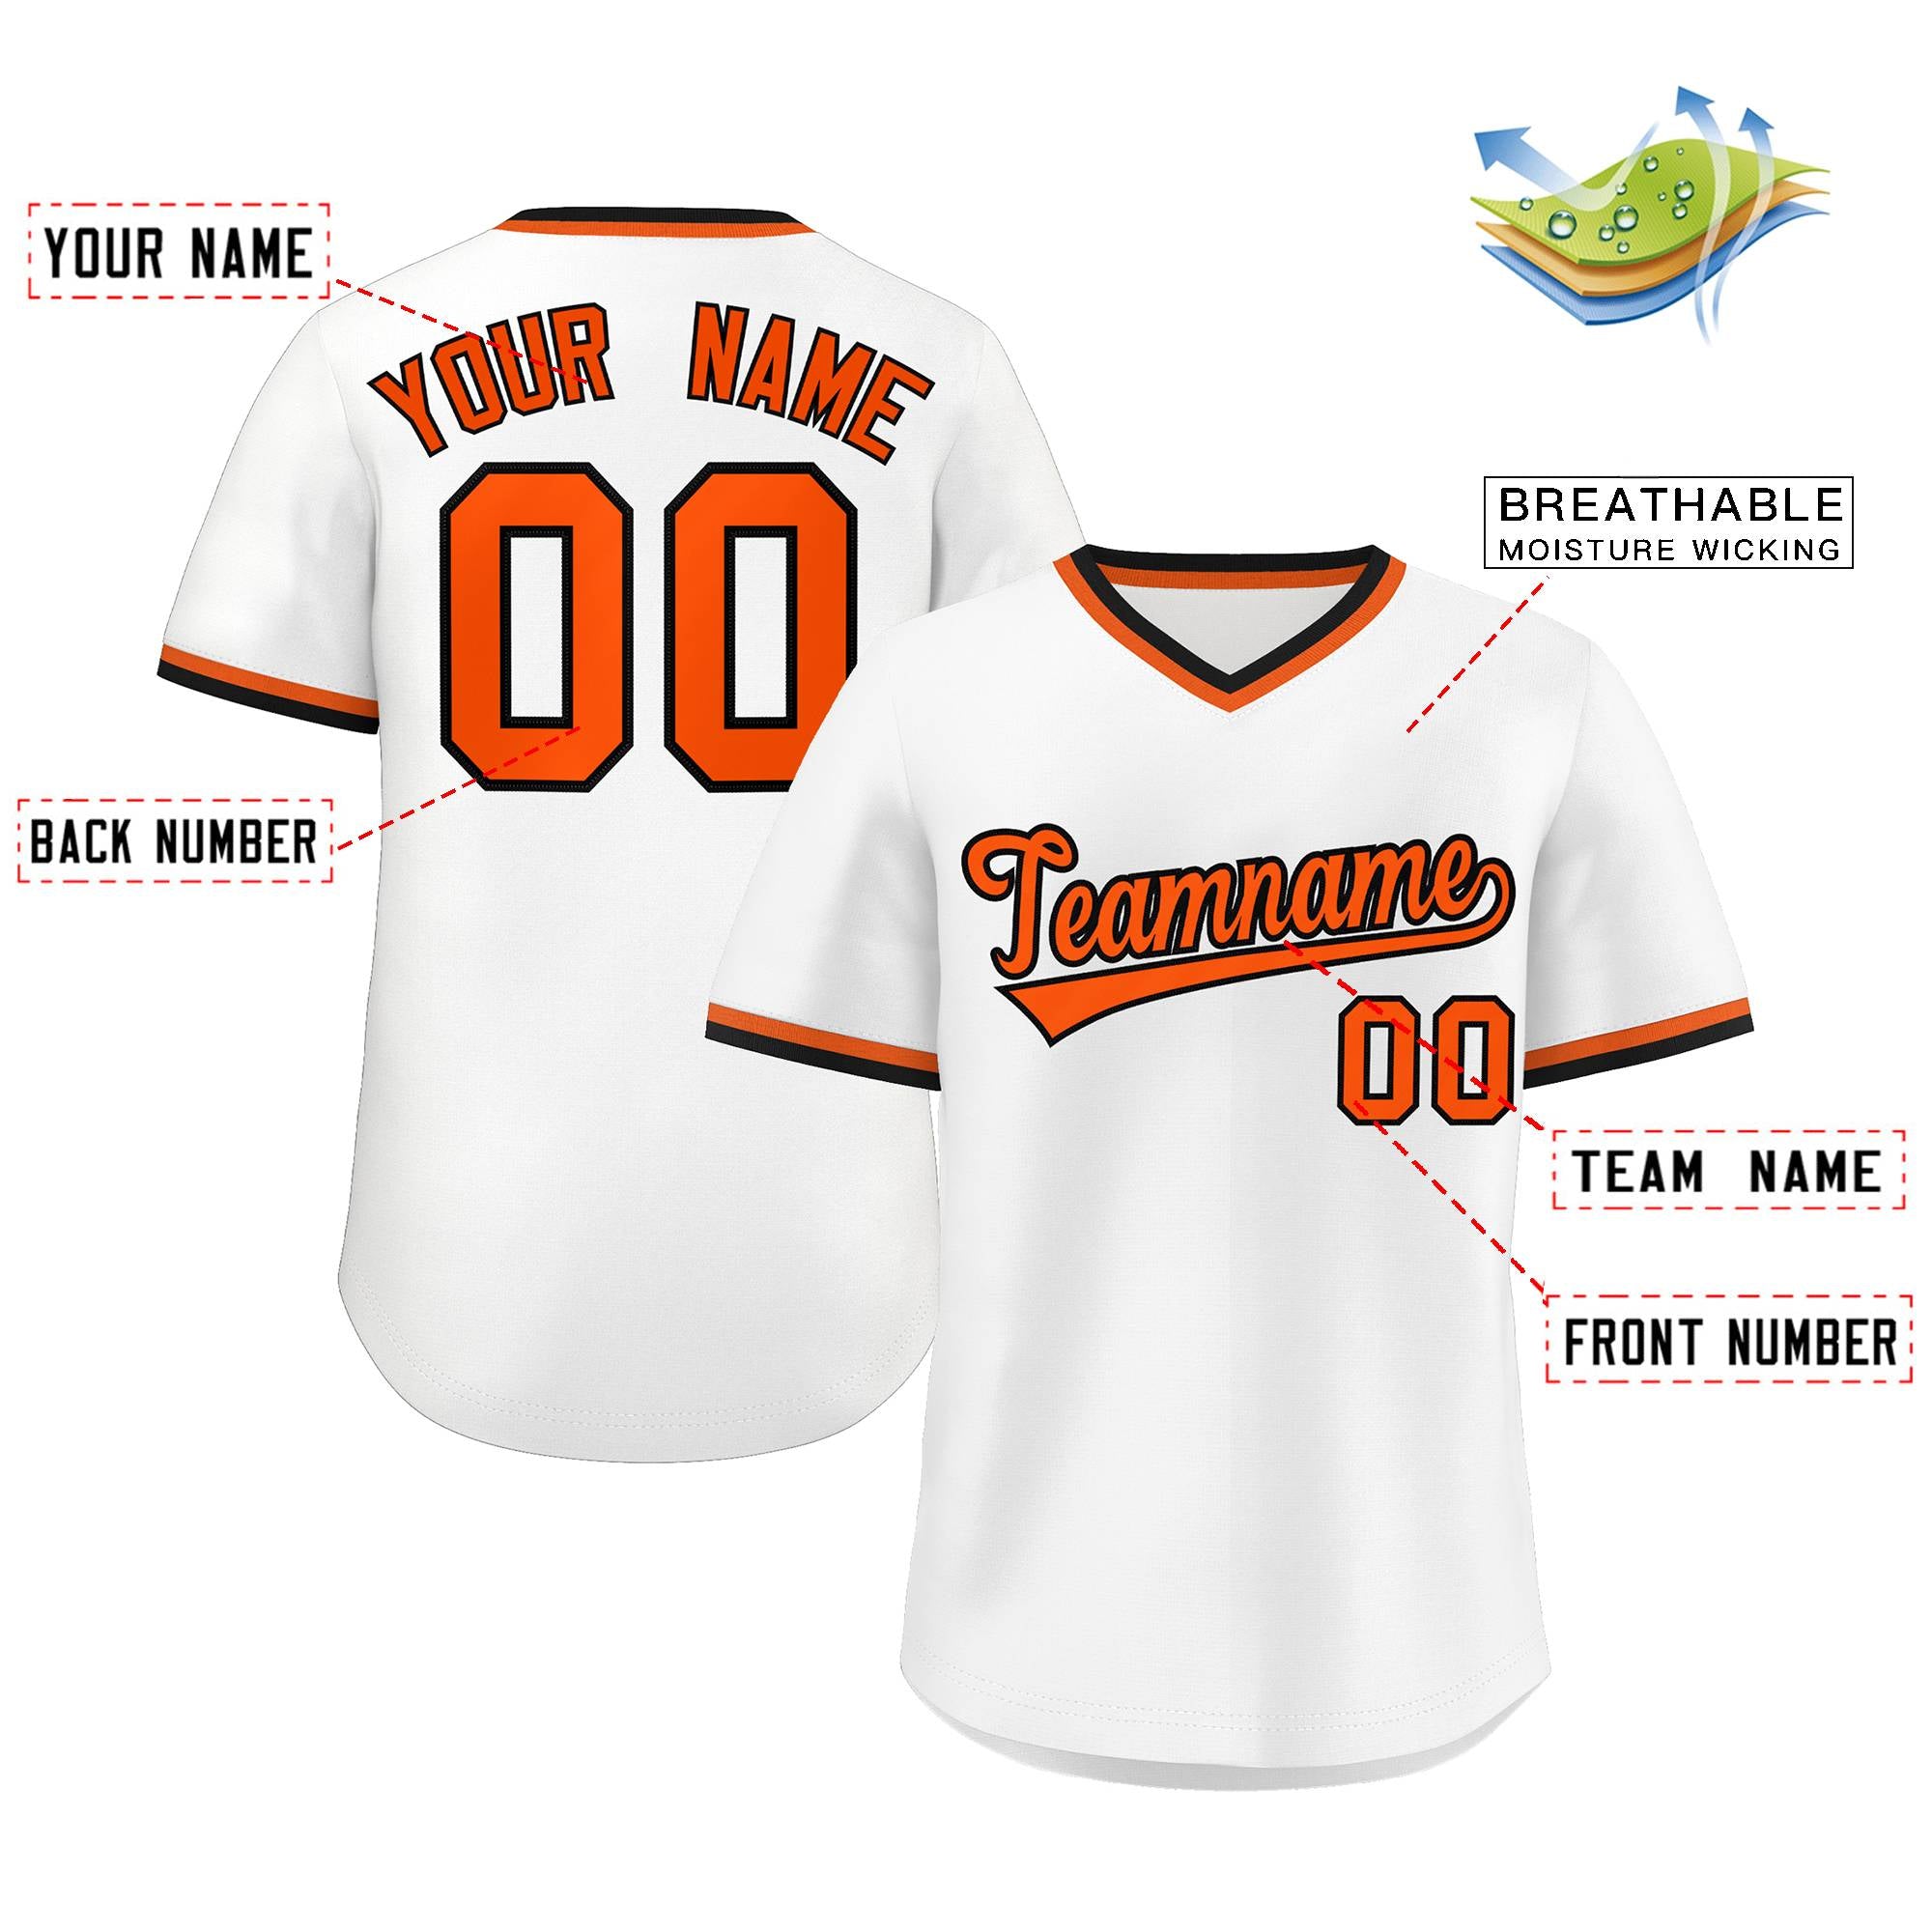 Custom White Orange Classic Style Outdoor Authentic Pullover Baseball Jersey